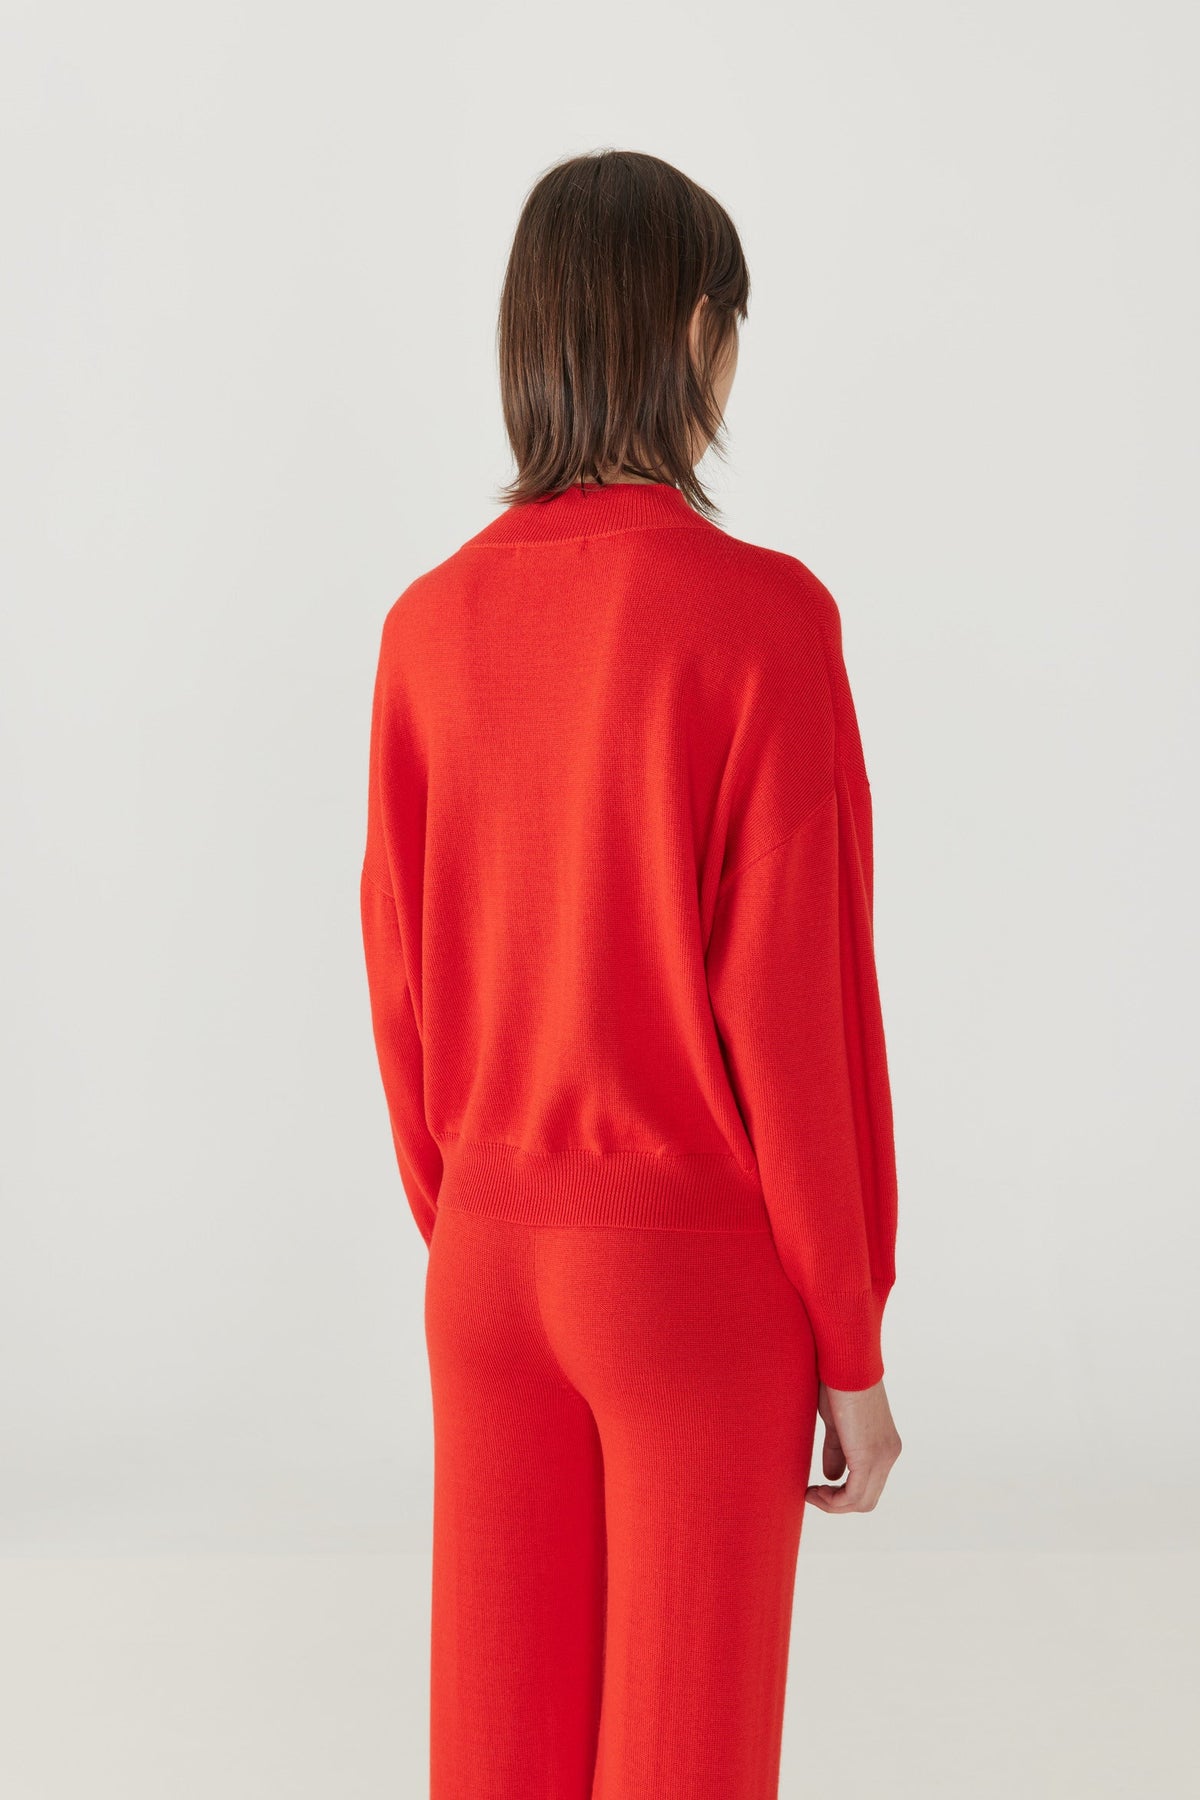 Adult Merino Mock Neck Pullover - Red Flame+Model is 6&#39;&quot; | 32&quot; Bust | 25&quot; Waist | 36.75&quot; Hips | size 2, wearing a size Small